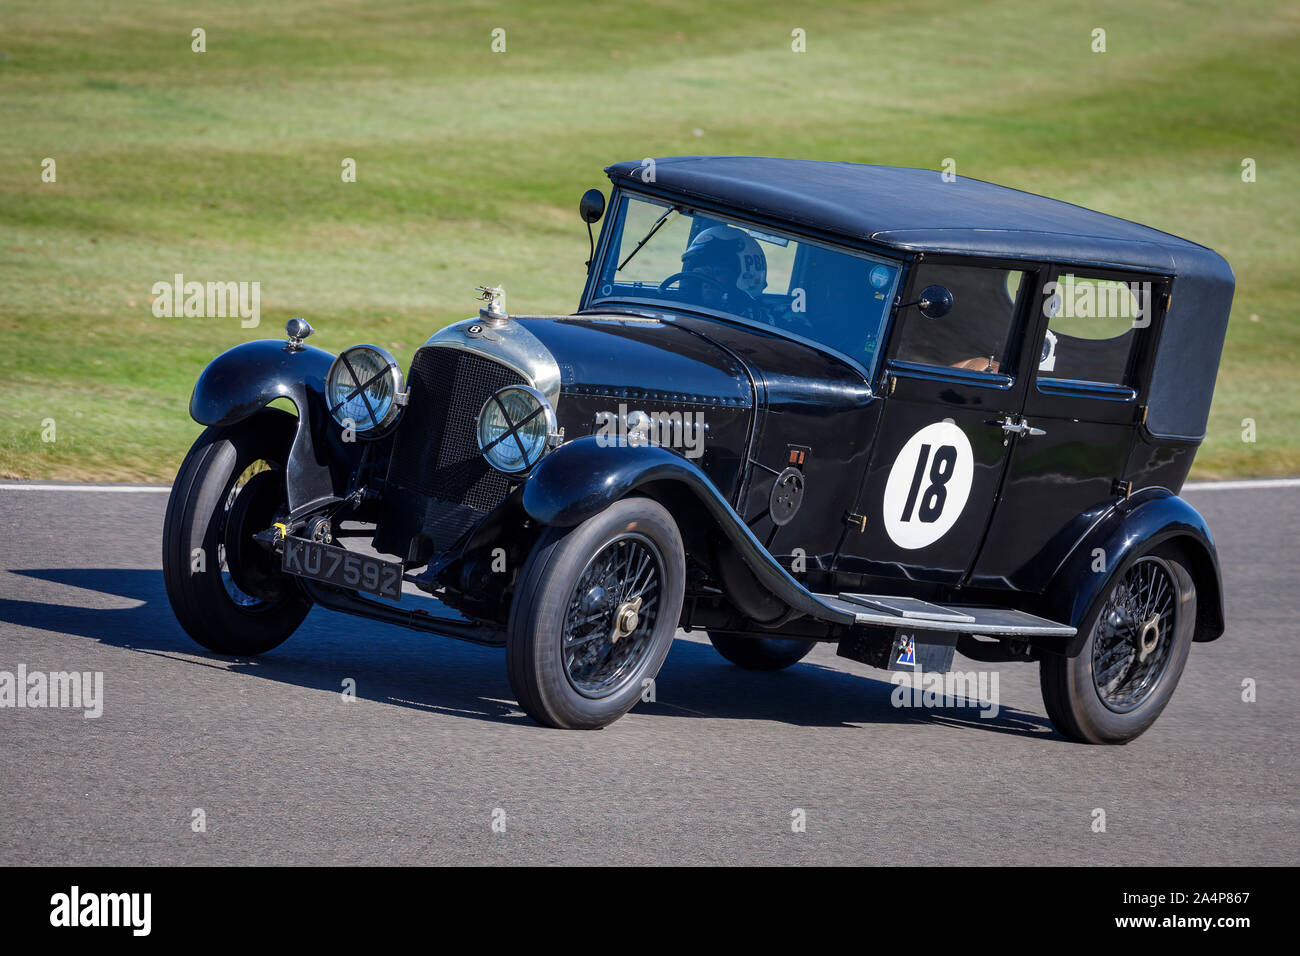 1926 Bentley 4.5 litre Parkward Saloon dueing the Brooklands Trophy race with driver Rowan Atkinson at the 2019 Goodwood Revival, Sussex, UK. Stock Photo